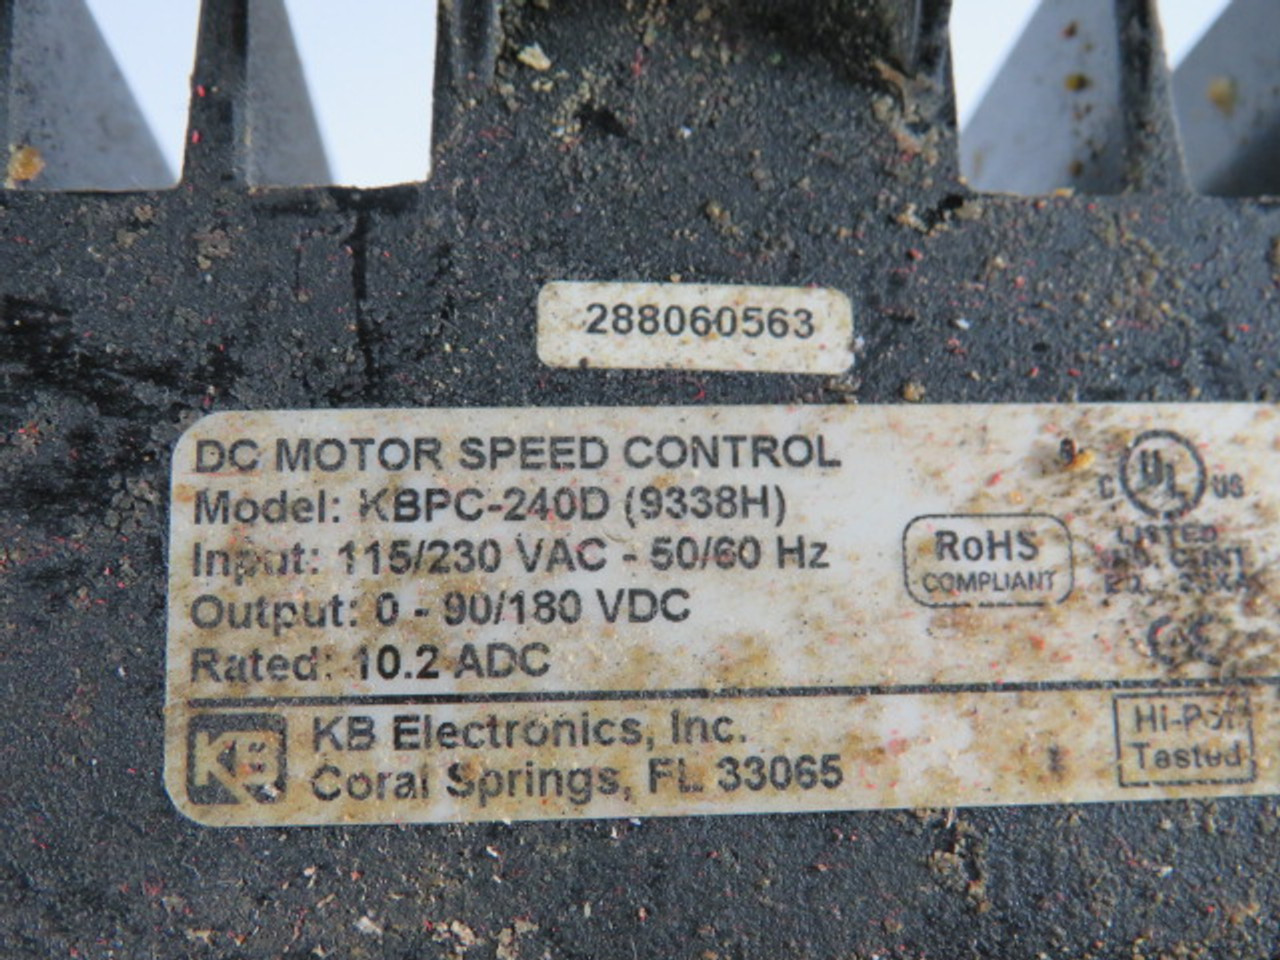 KB Drive KBPC-240D 9338H DC Motor Speed Control In. 115/230VAC 50/60Hz USED